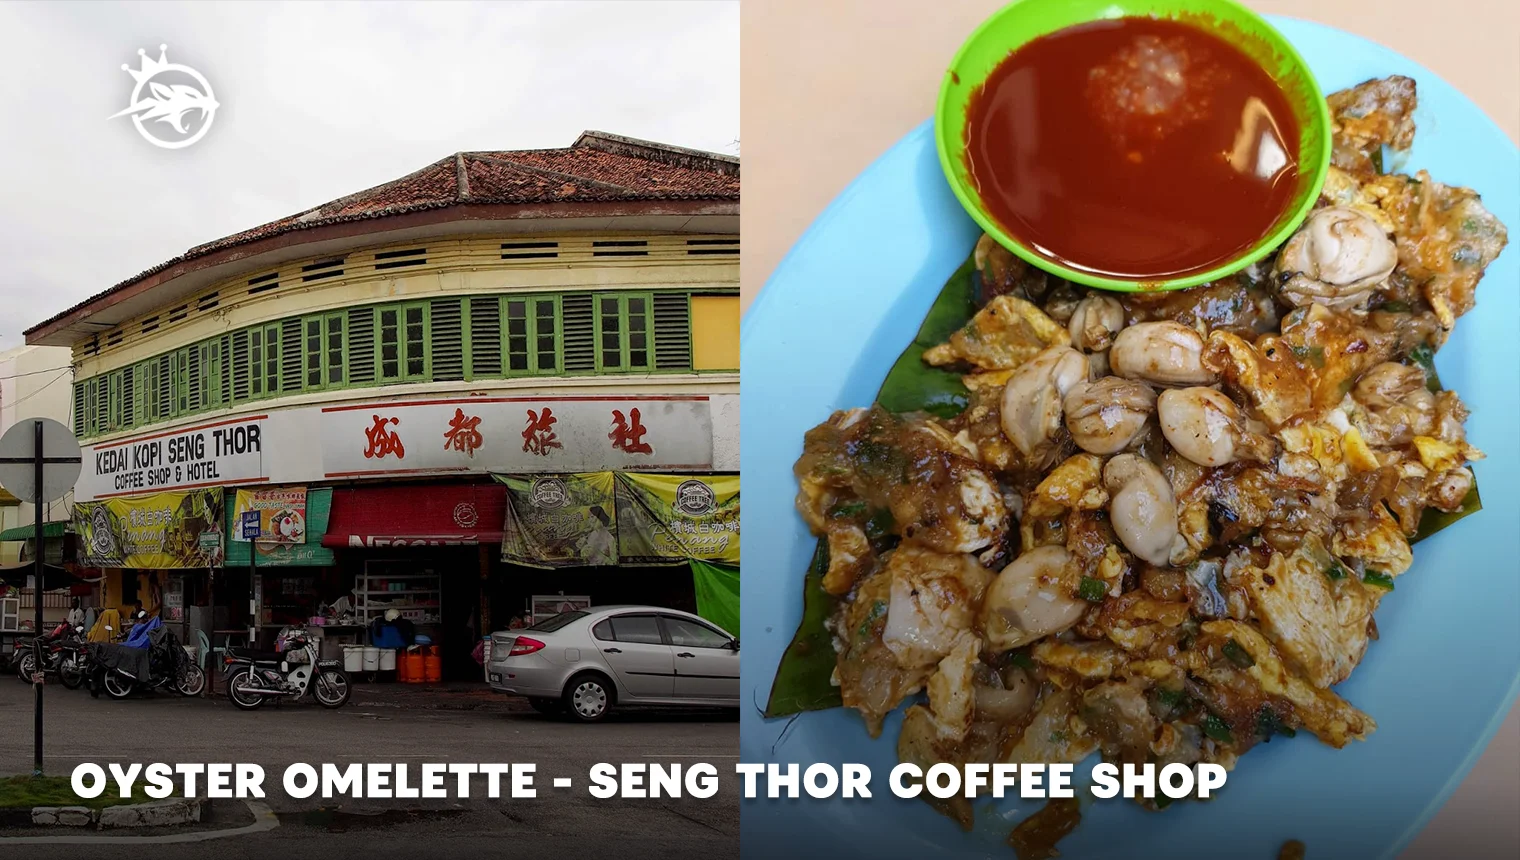 Oyster Omelette - Seng Thor Coffee Shop